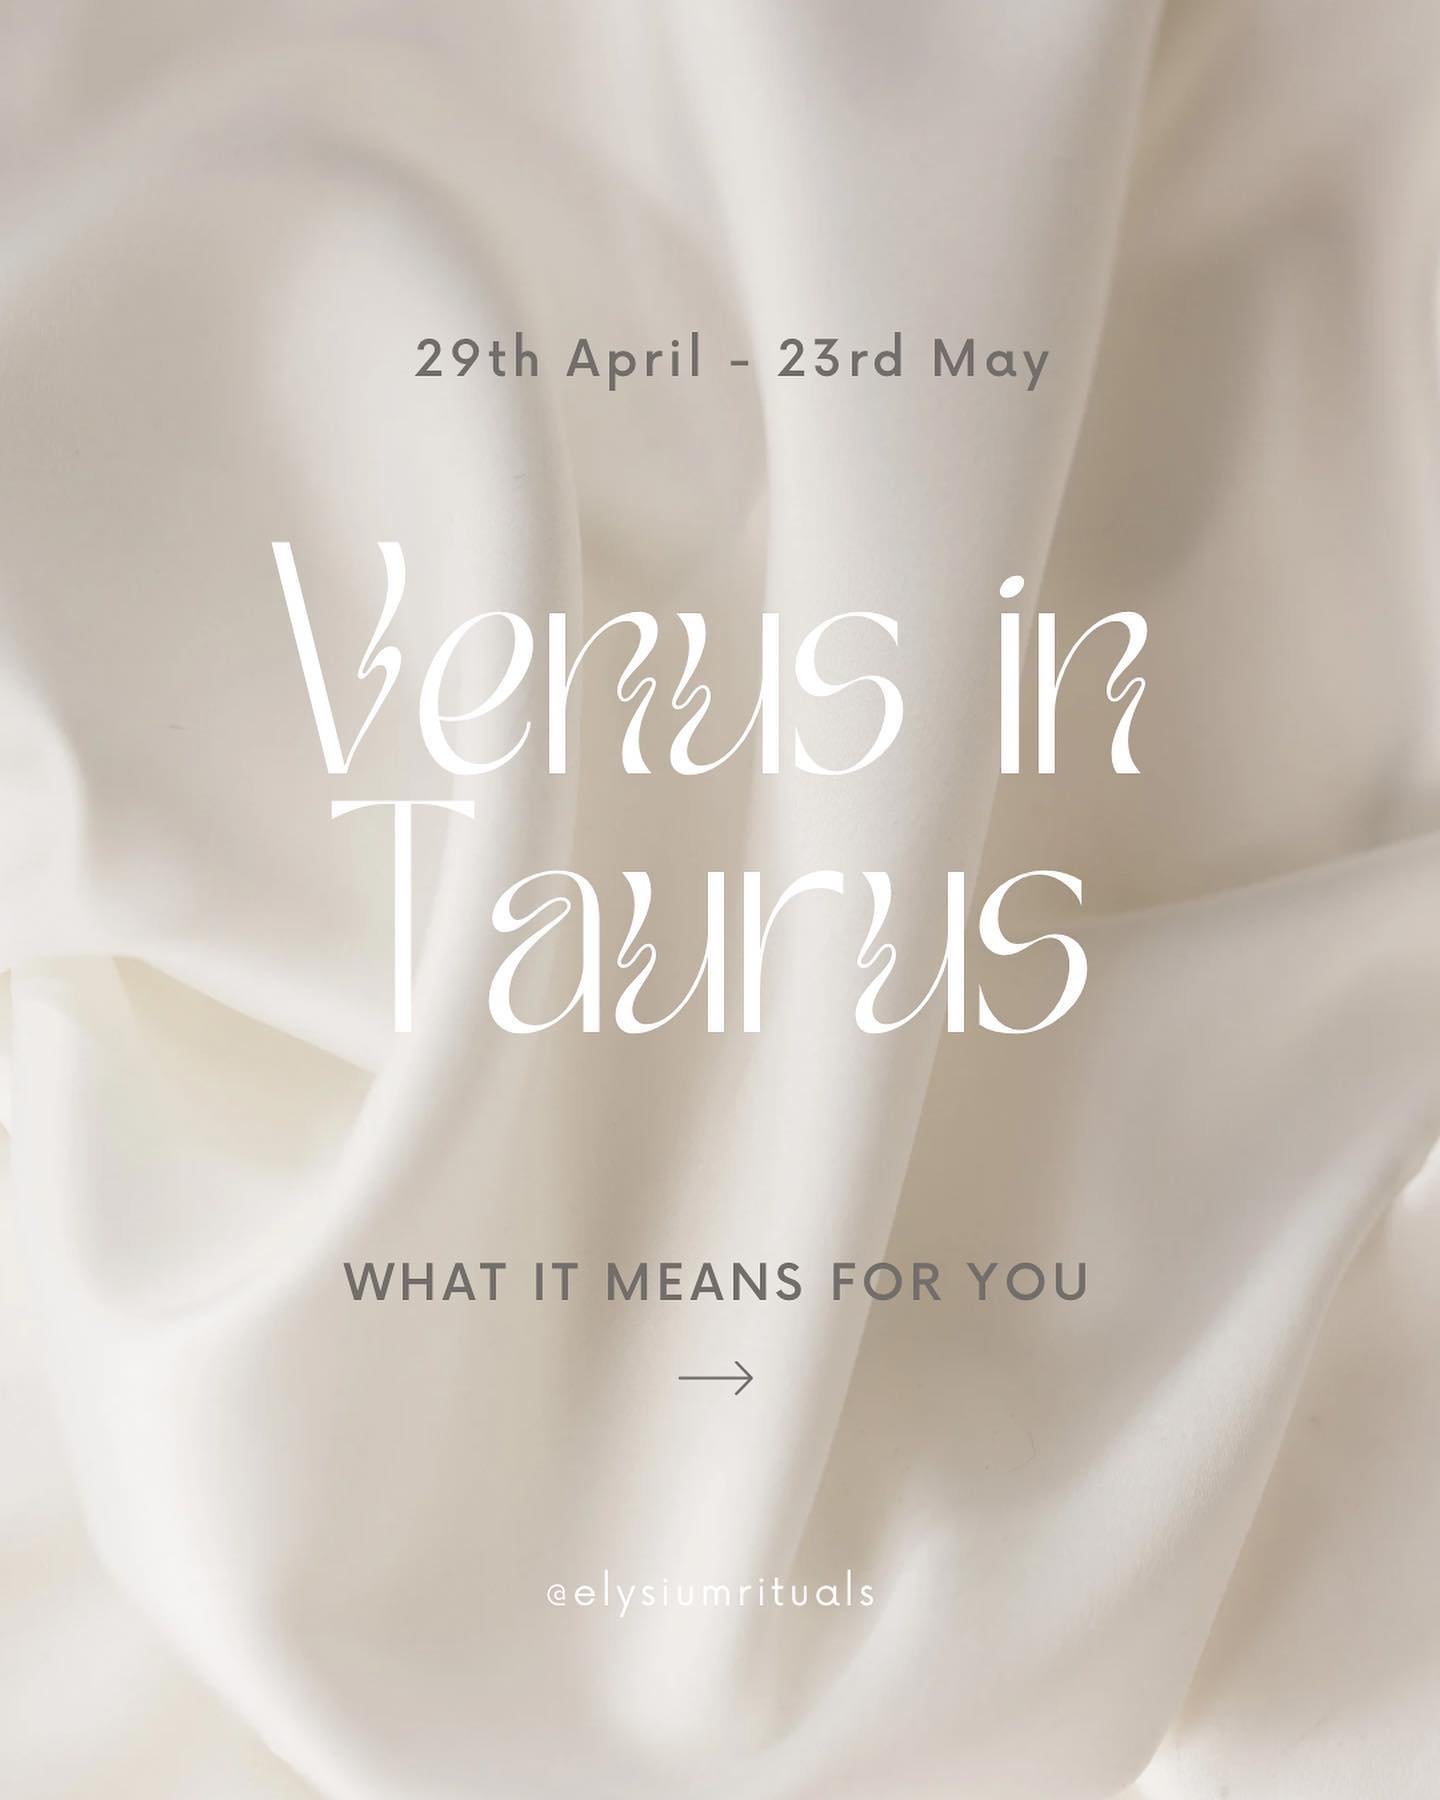 VENUS IN TAURUS:

Venus in Taurus is a time for feeling into our senses, getting present with the body. Eat all the good food, drink all the good drink, and savour every sip ☕ 

Venus defines where we see beauty in the world and what we desire, in Ta